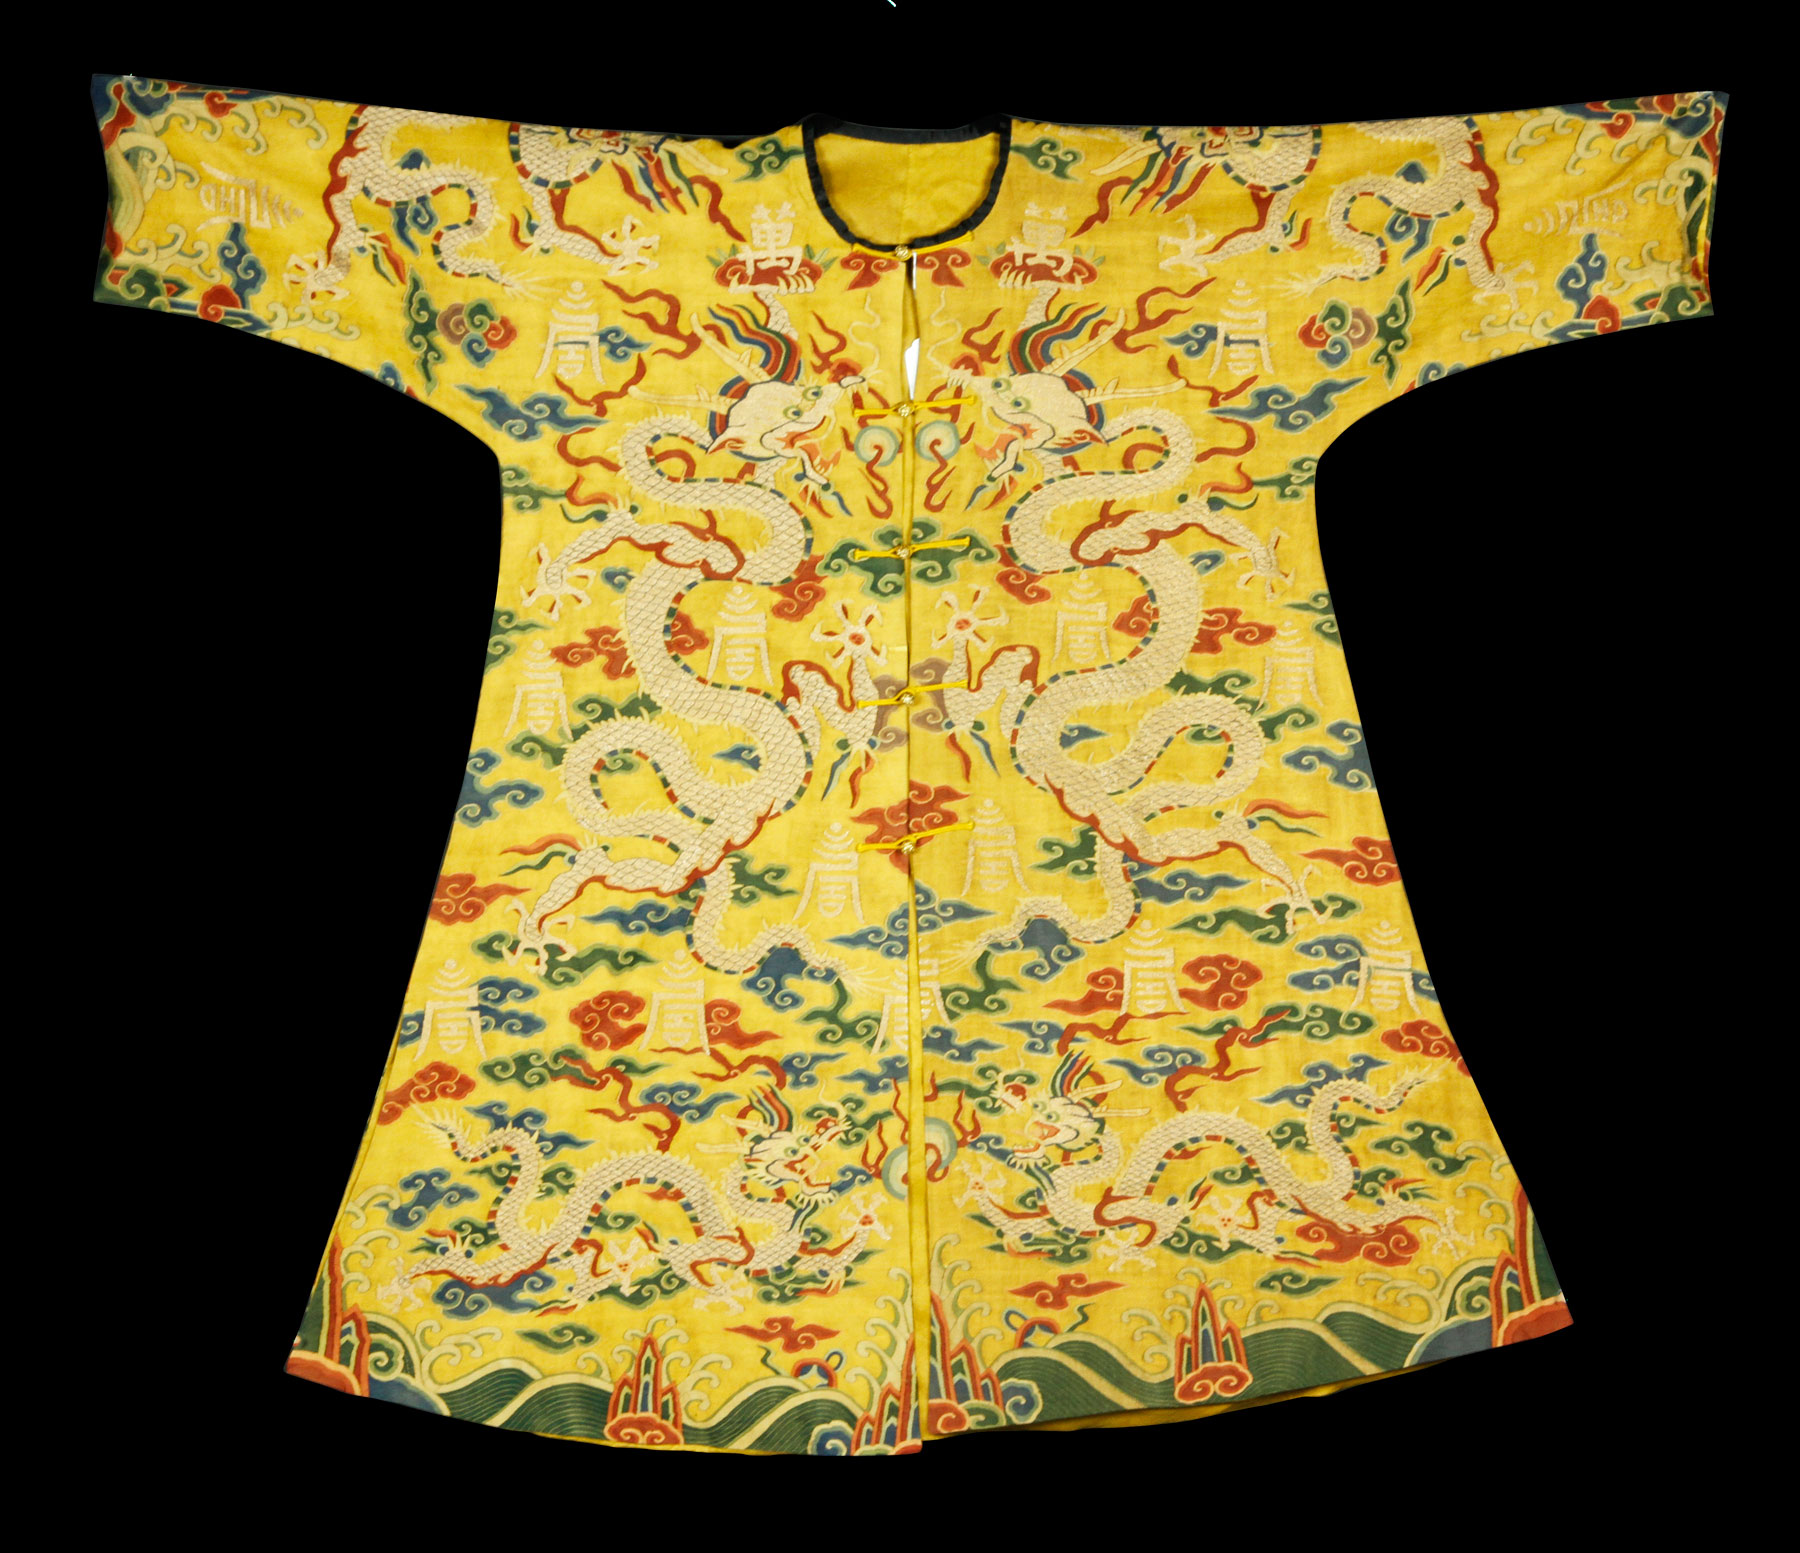 Imperial kesi dragon robe, China, Qing Dynasty (1644-1911), the front woven with a pair of magnificent five-clawed dragons facing each other in gold thread, on an imperial yellow background, 41" x 28"